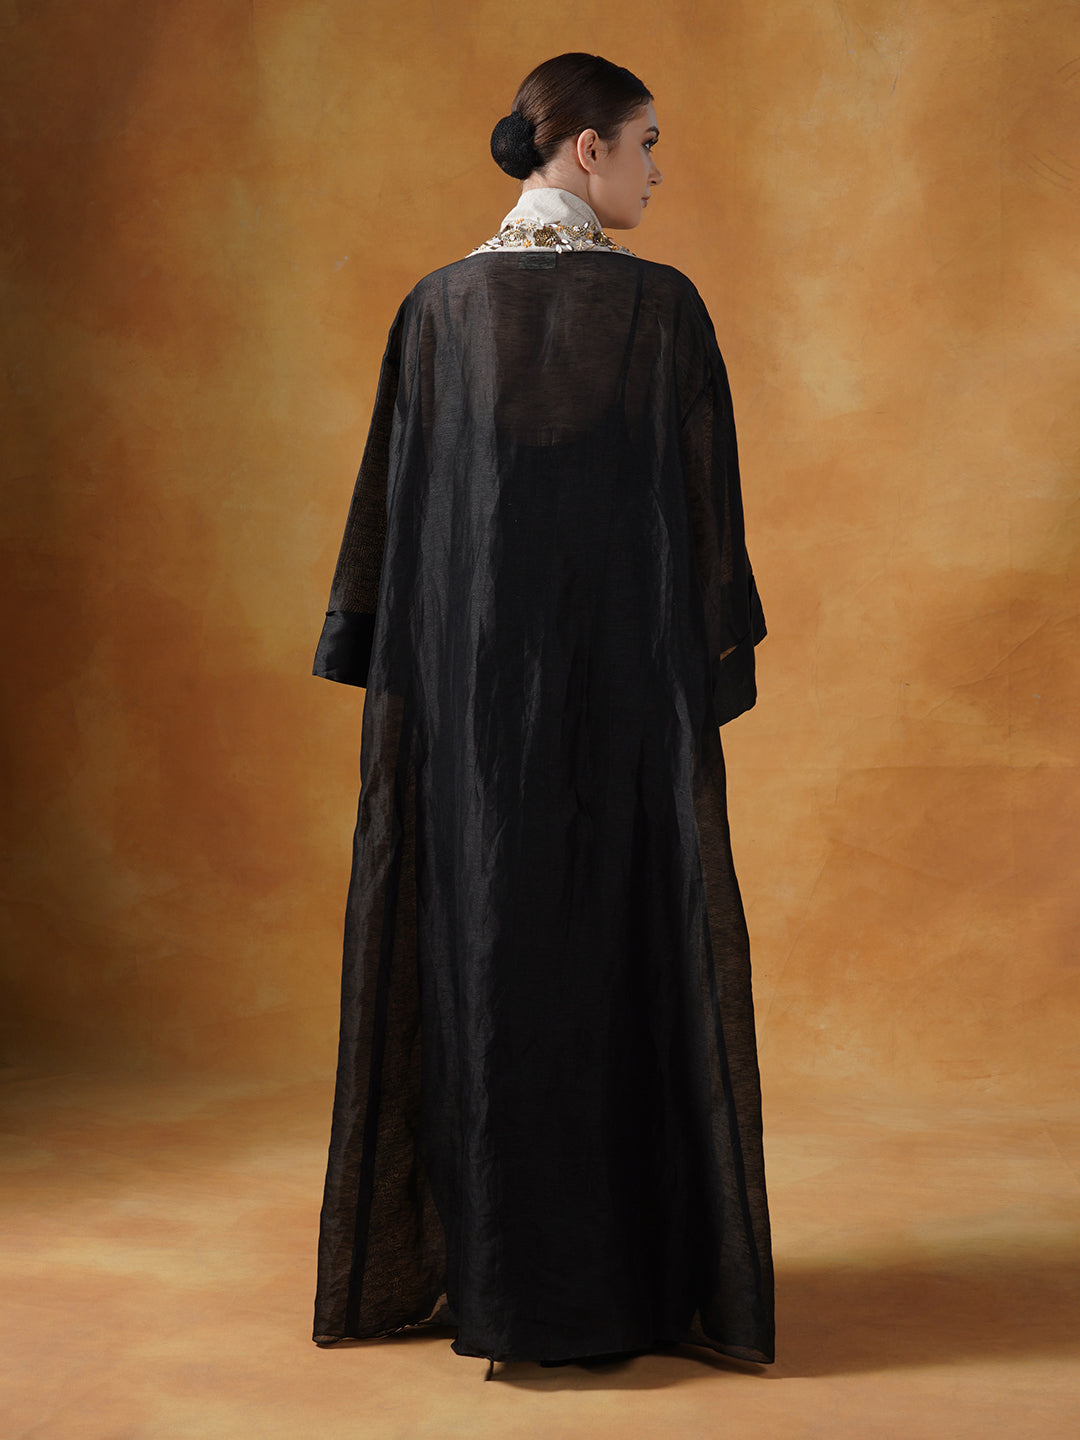 A black floor length lose-fitted gown with an embellished deep yoke neck line.